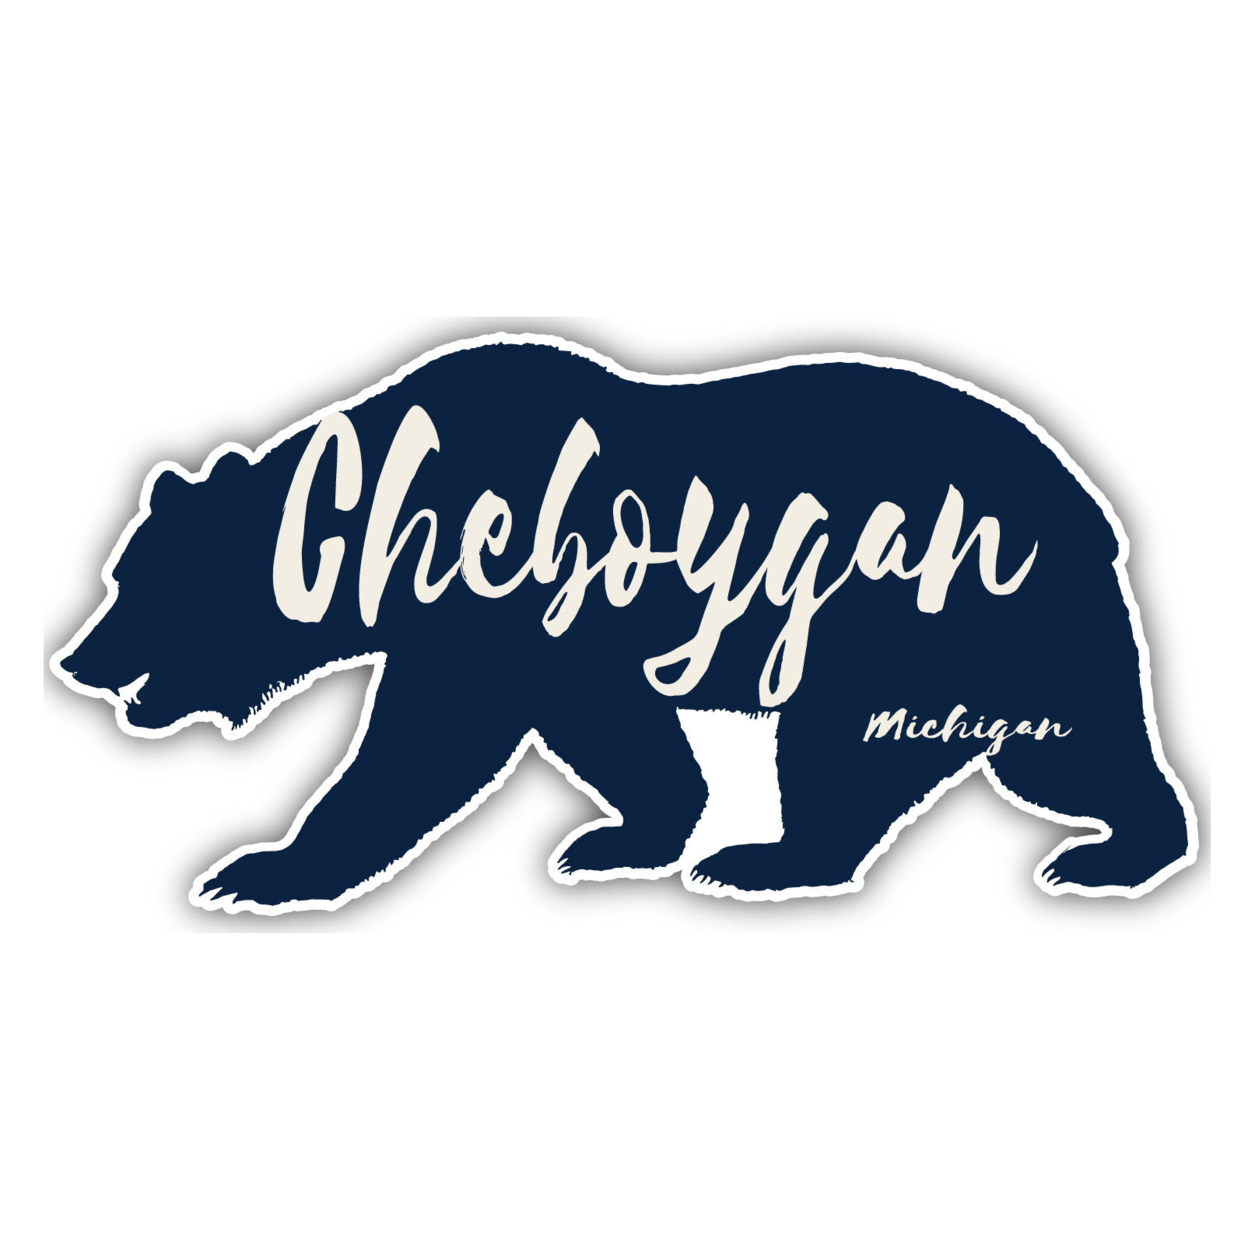 Cheboygan Michigan Souvenir Decorative Stickers (Choose Theme And Size) - 4-Pack, 6-Inch, Great Outdoors